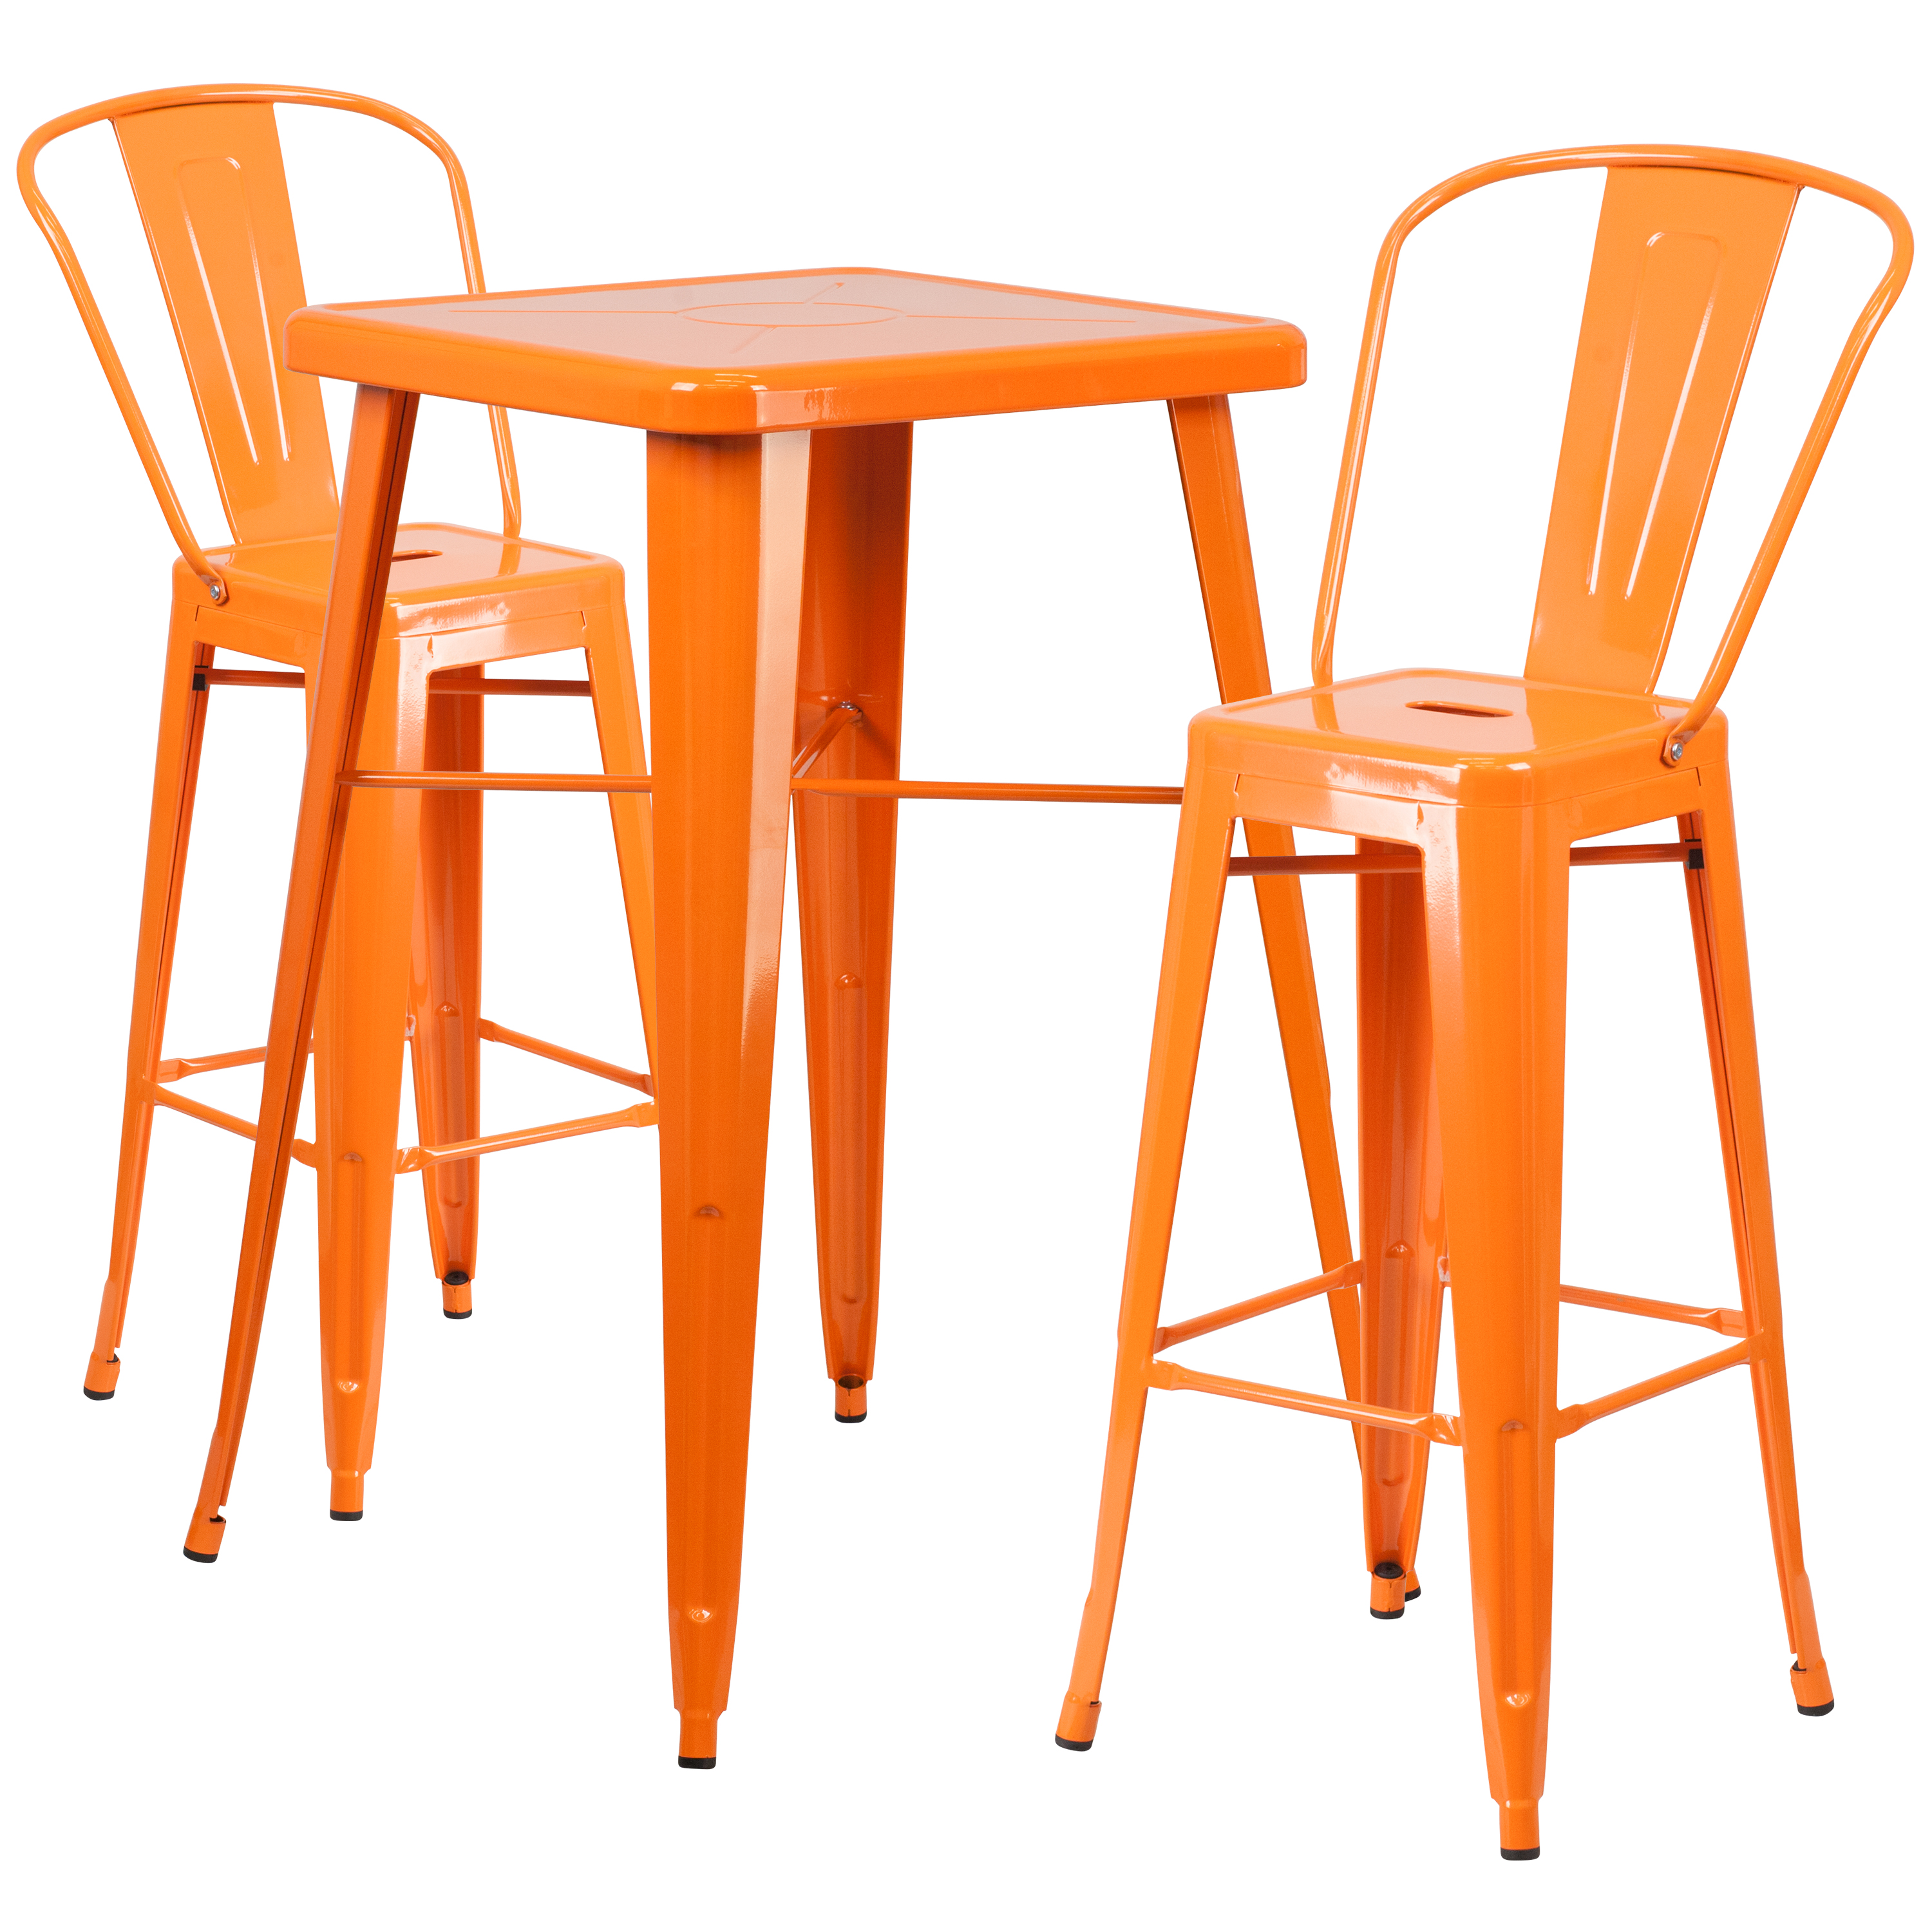 Flash Furniture CH-31330B-2-30GB-OR-GG23.75" Square Orange Metal Indoor/Outdoor Bar Table Set with 2 Stools with Backs